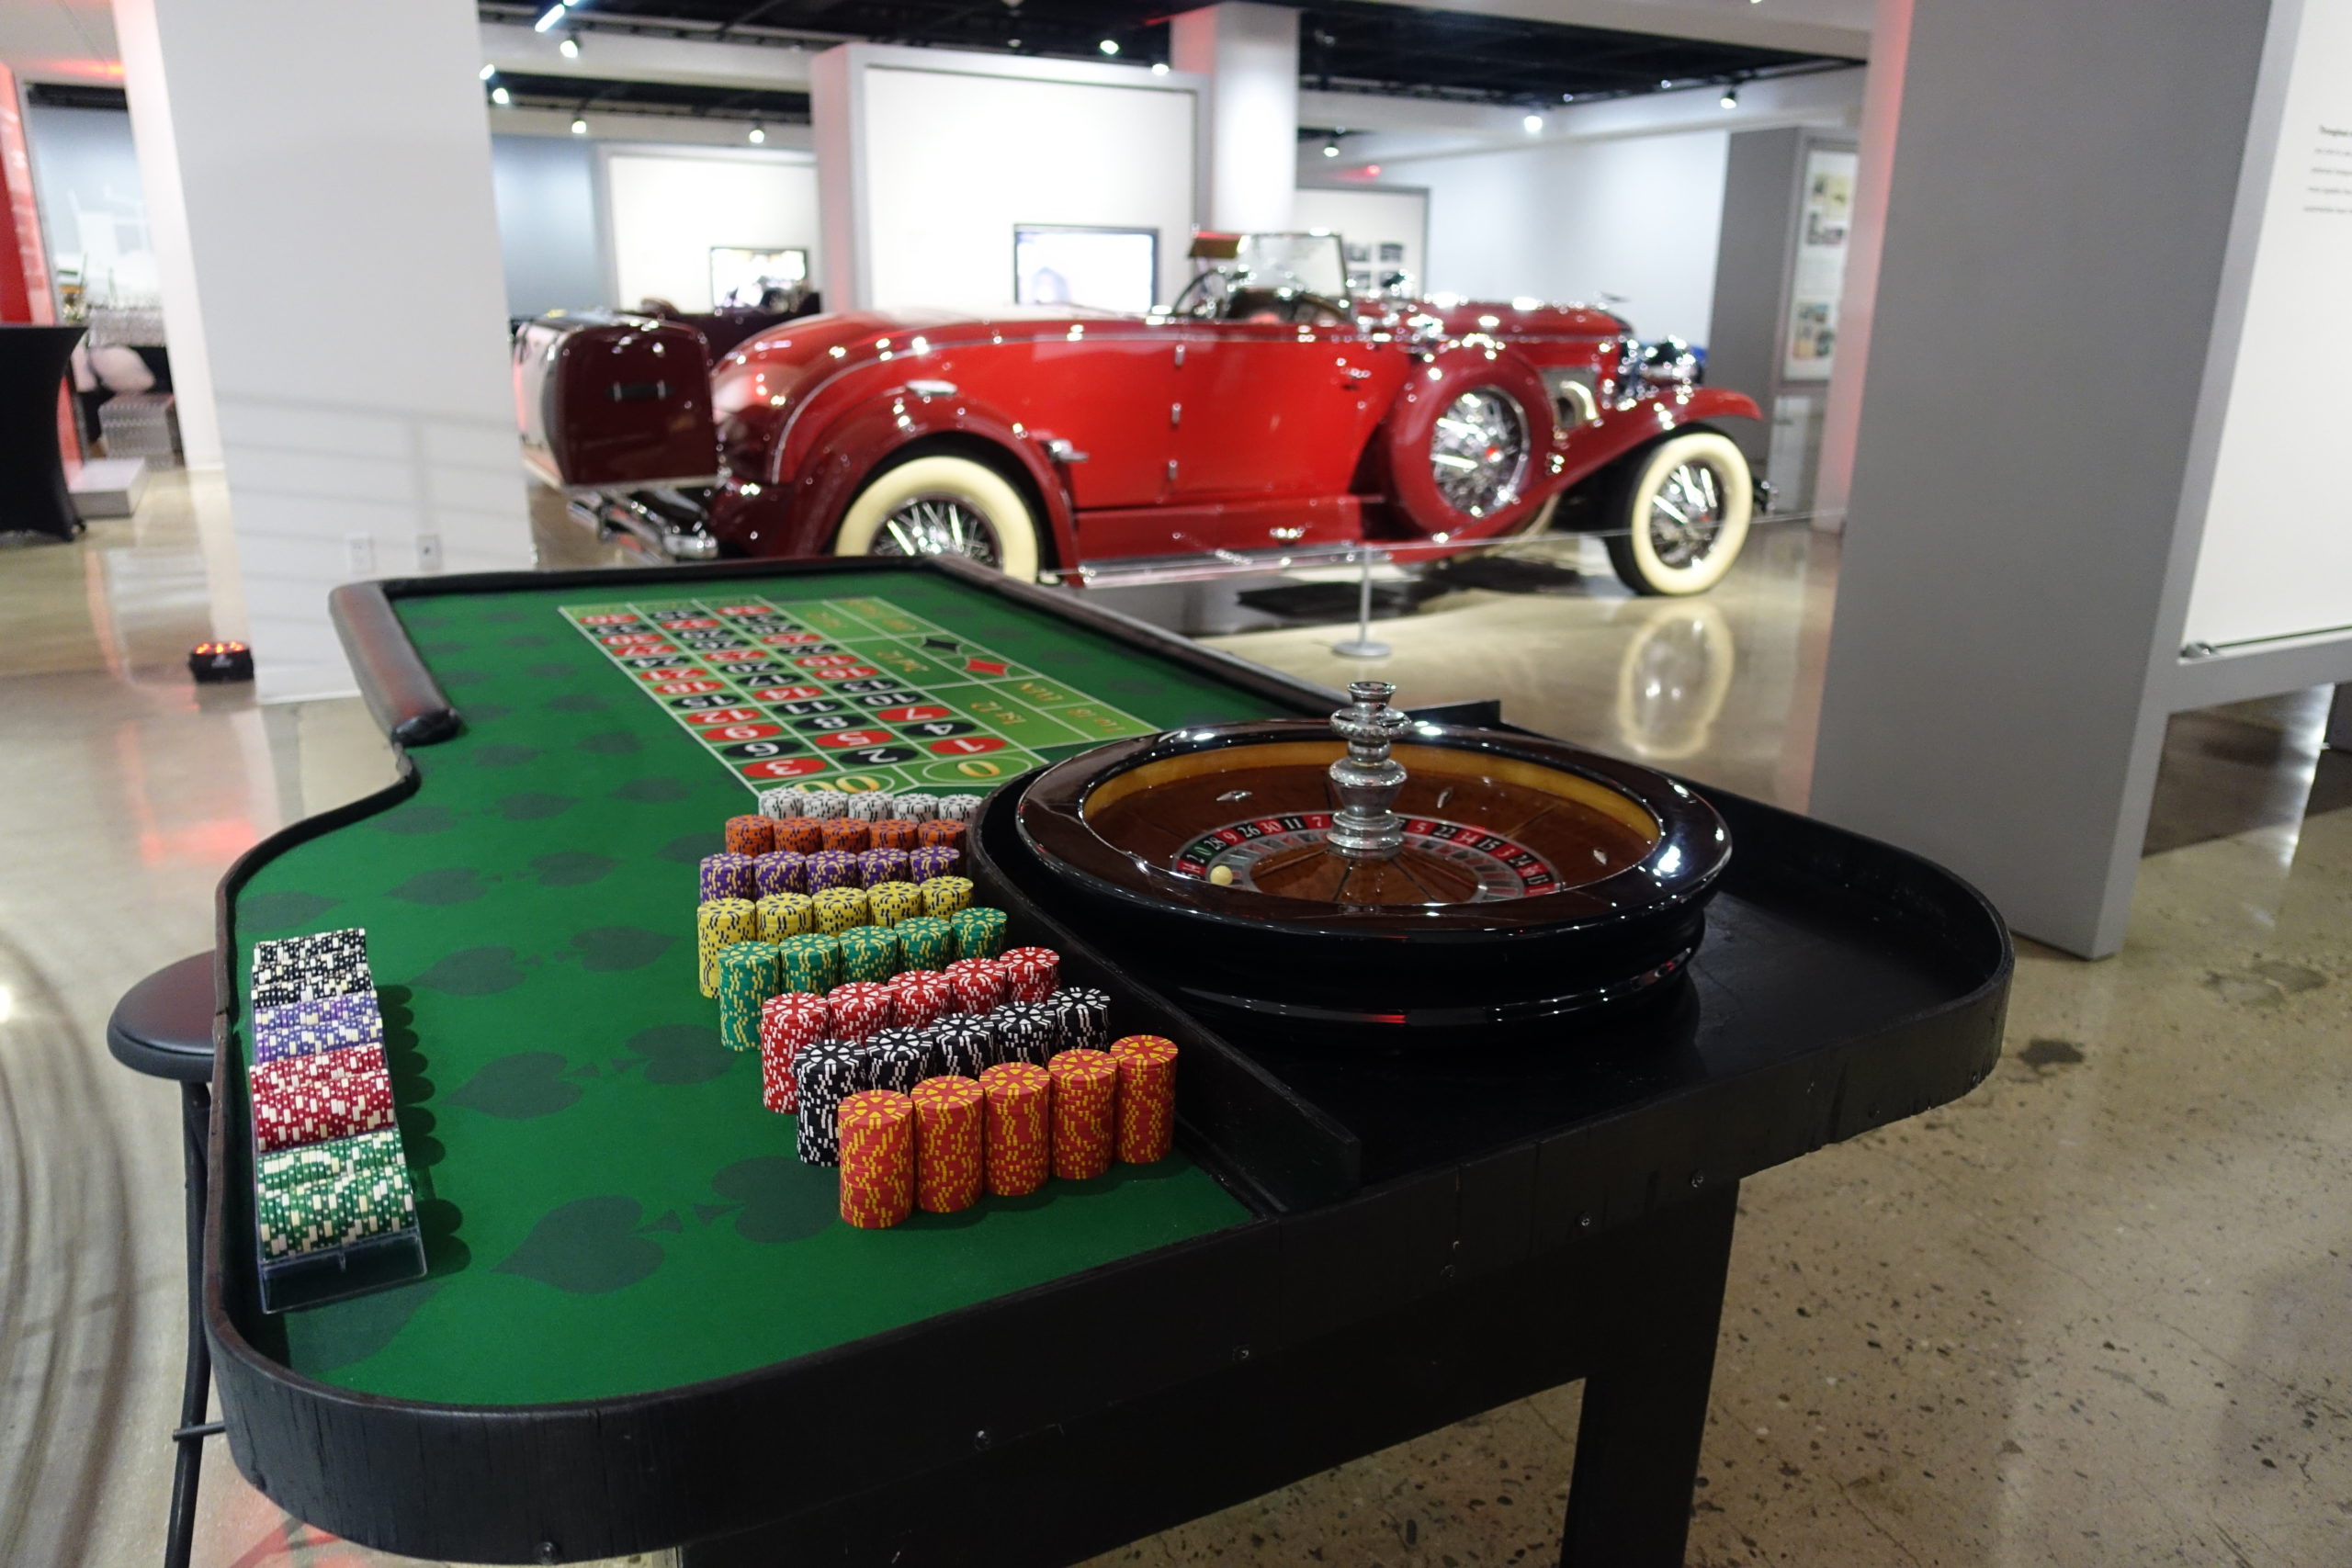 A Roulette Table At A Casino-themed Event